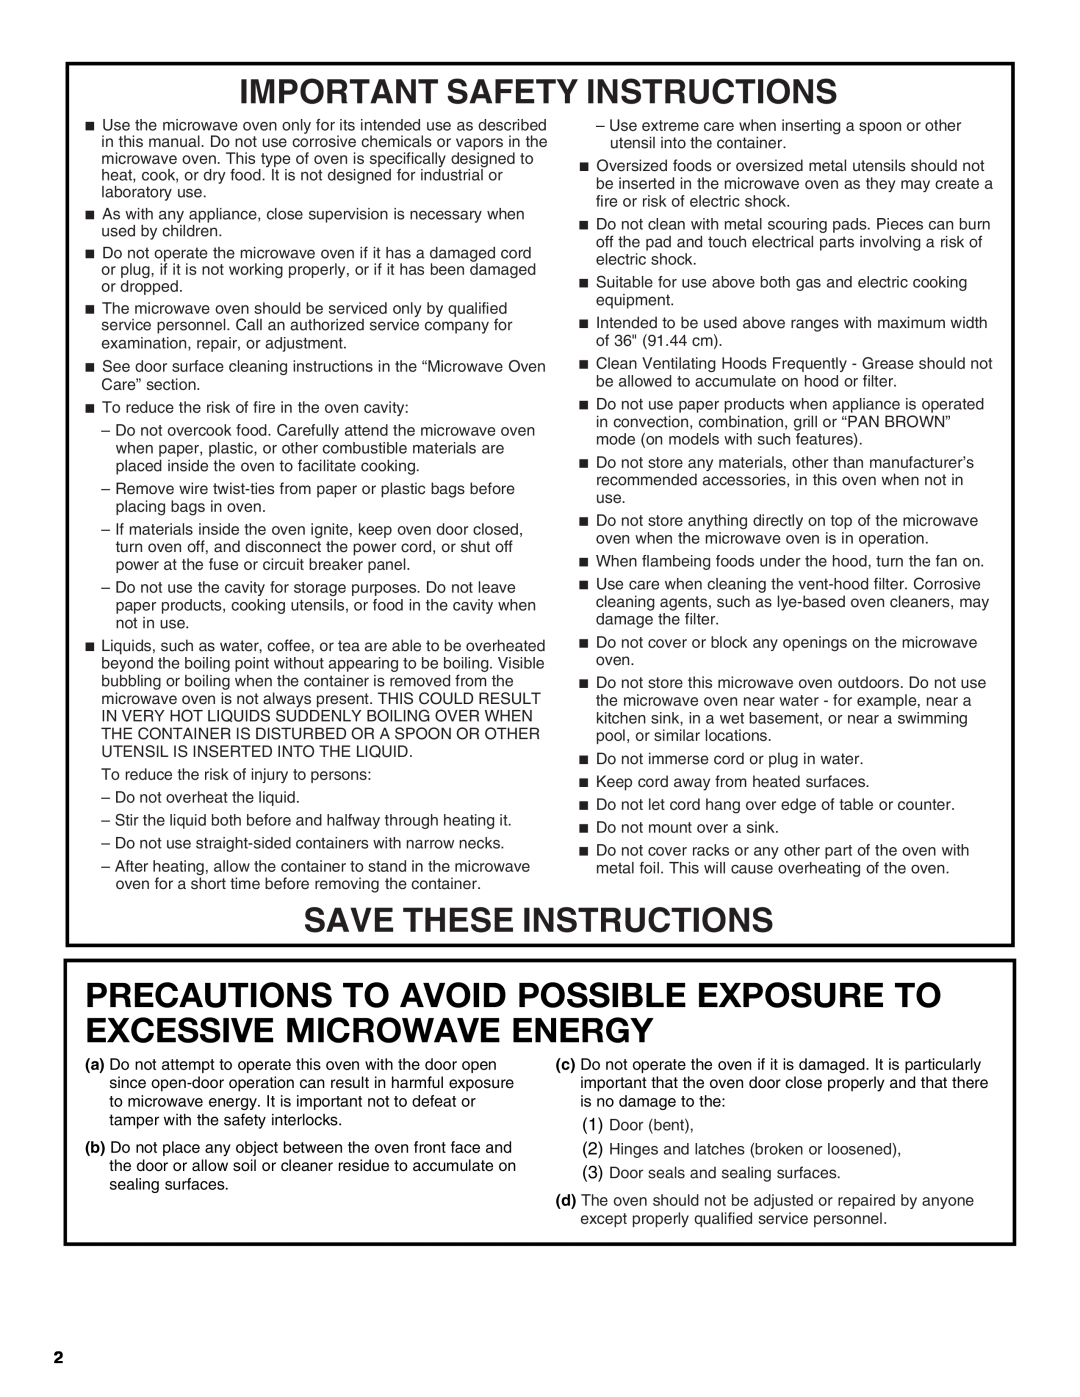 Jenn-Air W10259841B Precautions To Avoid Possible Exposure To Excessive Microwave Energy, Important Safety Instructions 